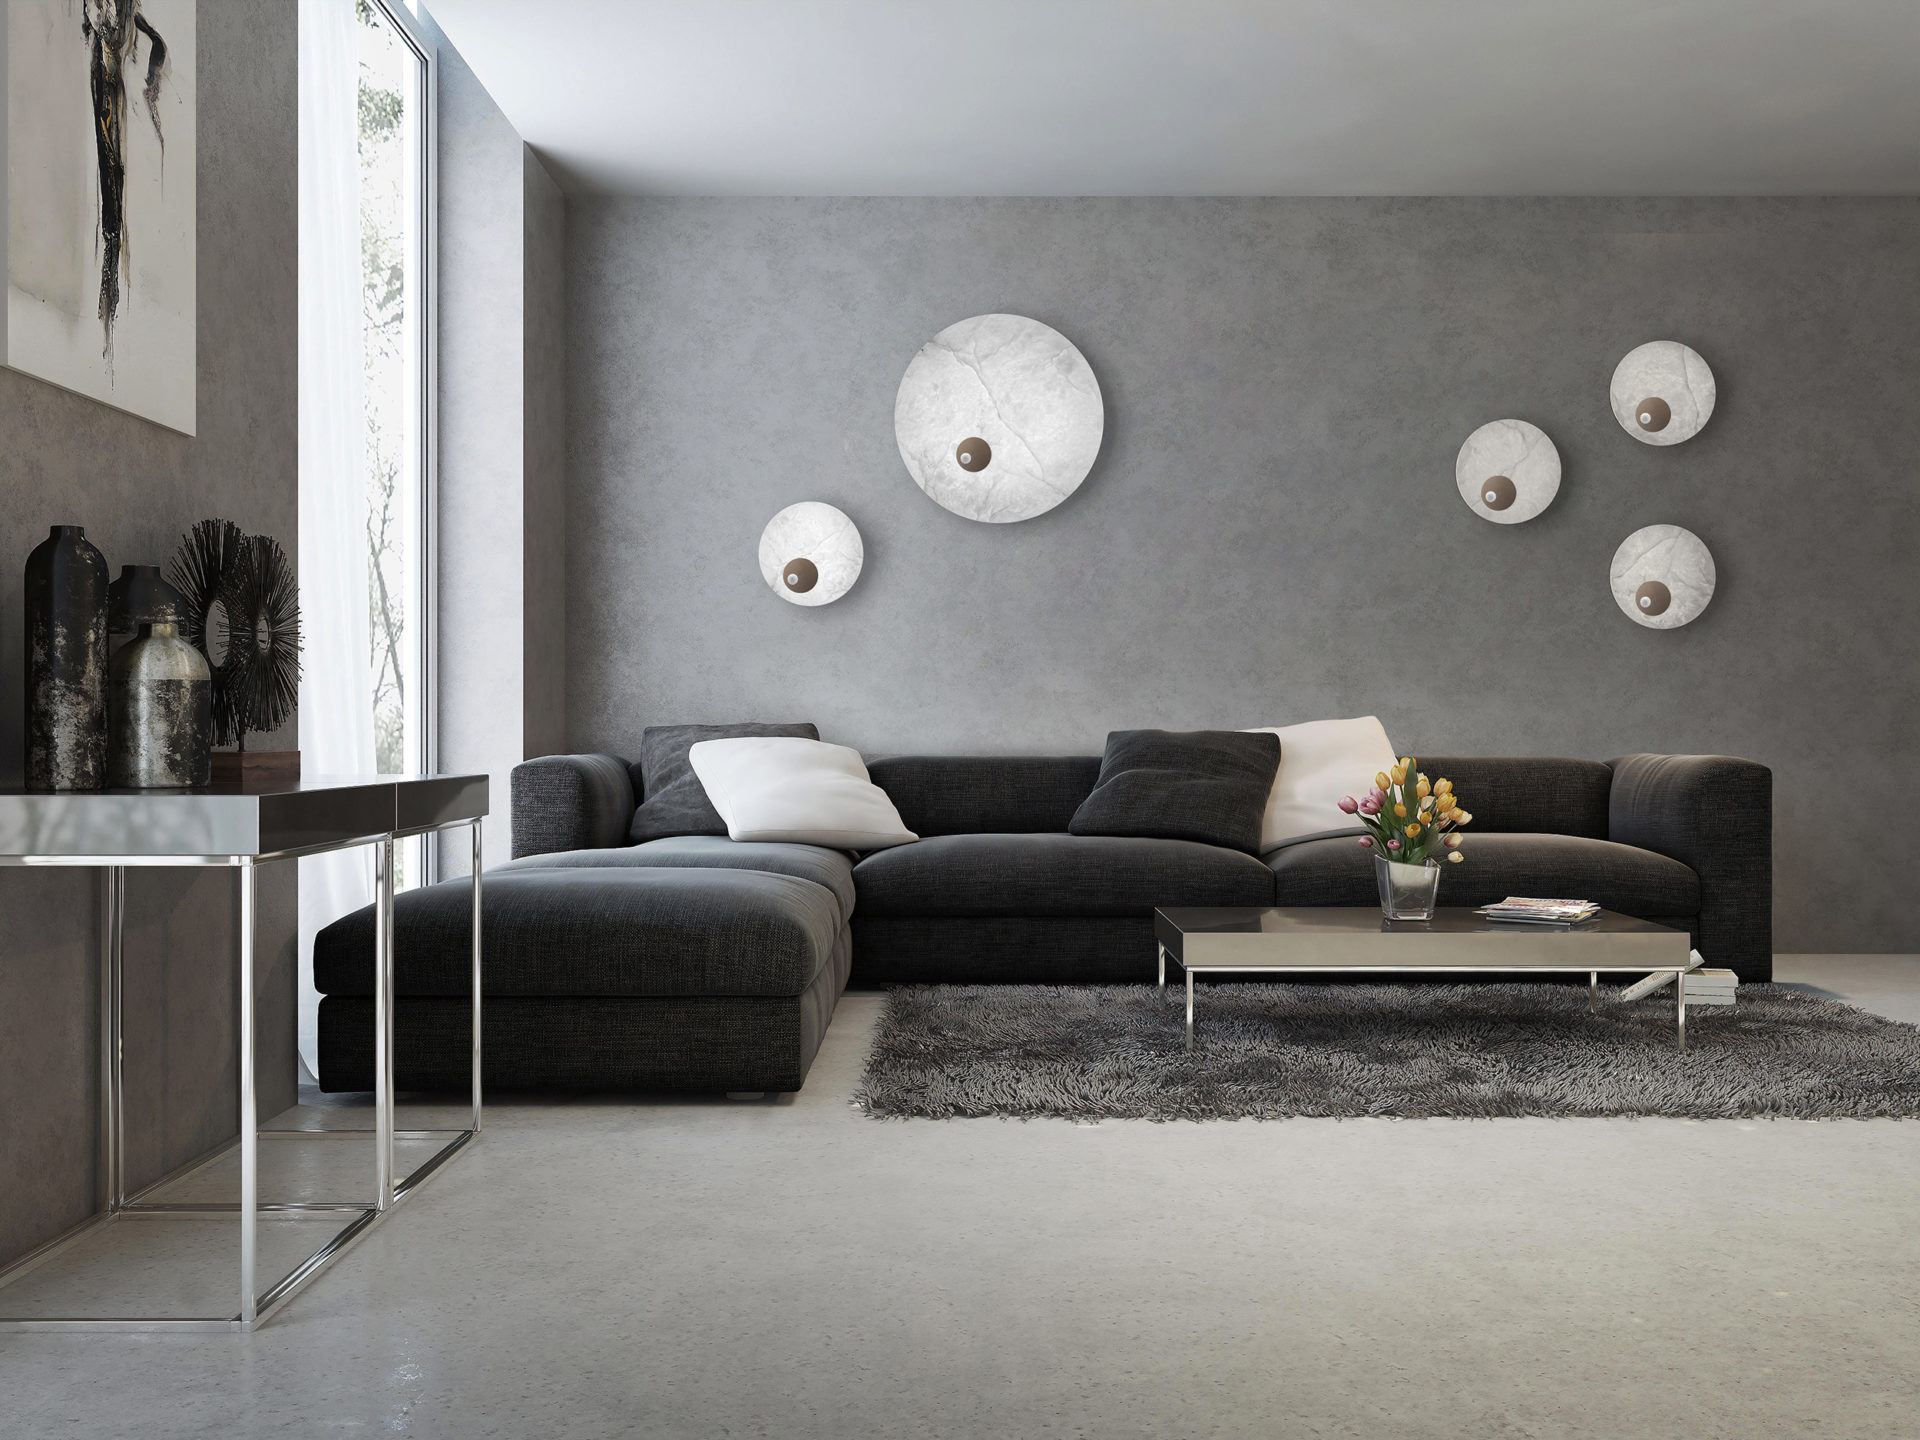 How to illuminate a modern and elegant house: Luna Nuova collection